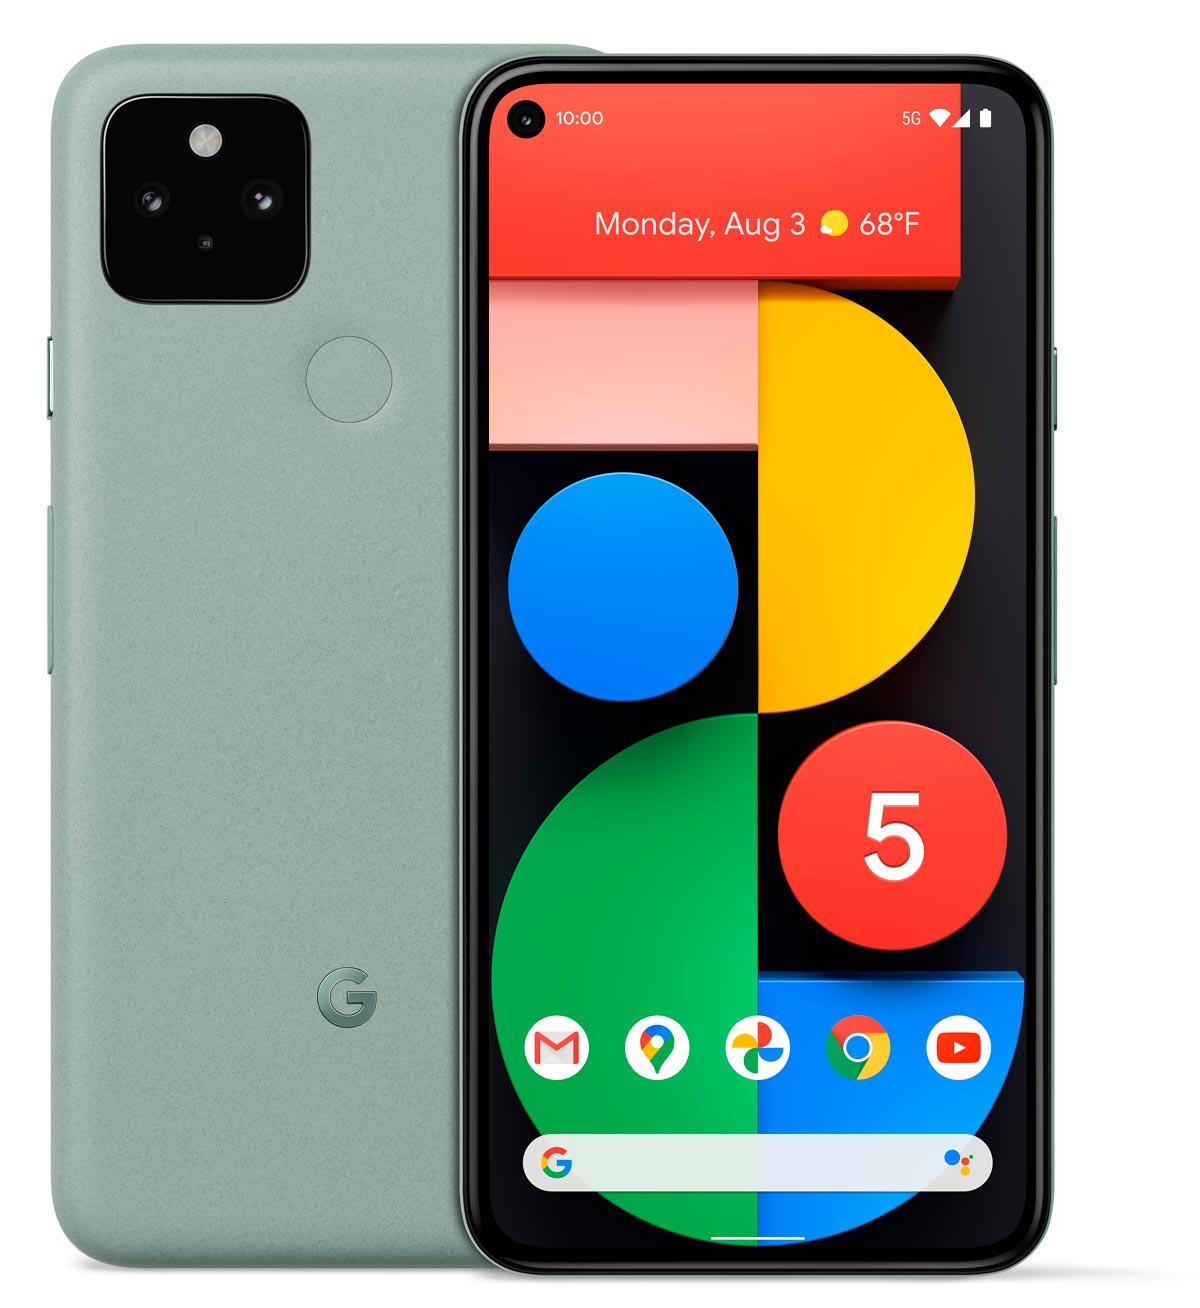 The Google Pixel 5 Android smartphone in Sorta Sage